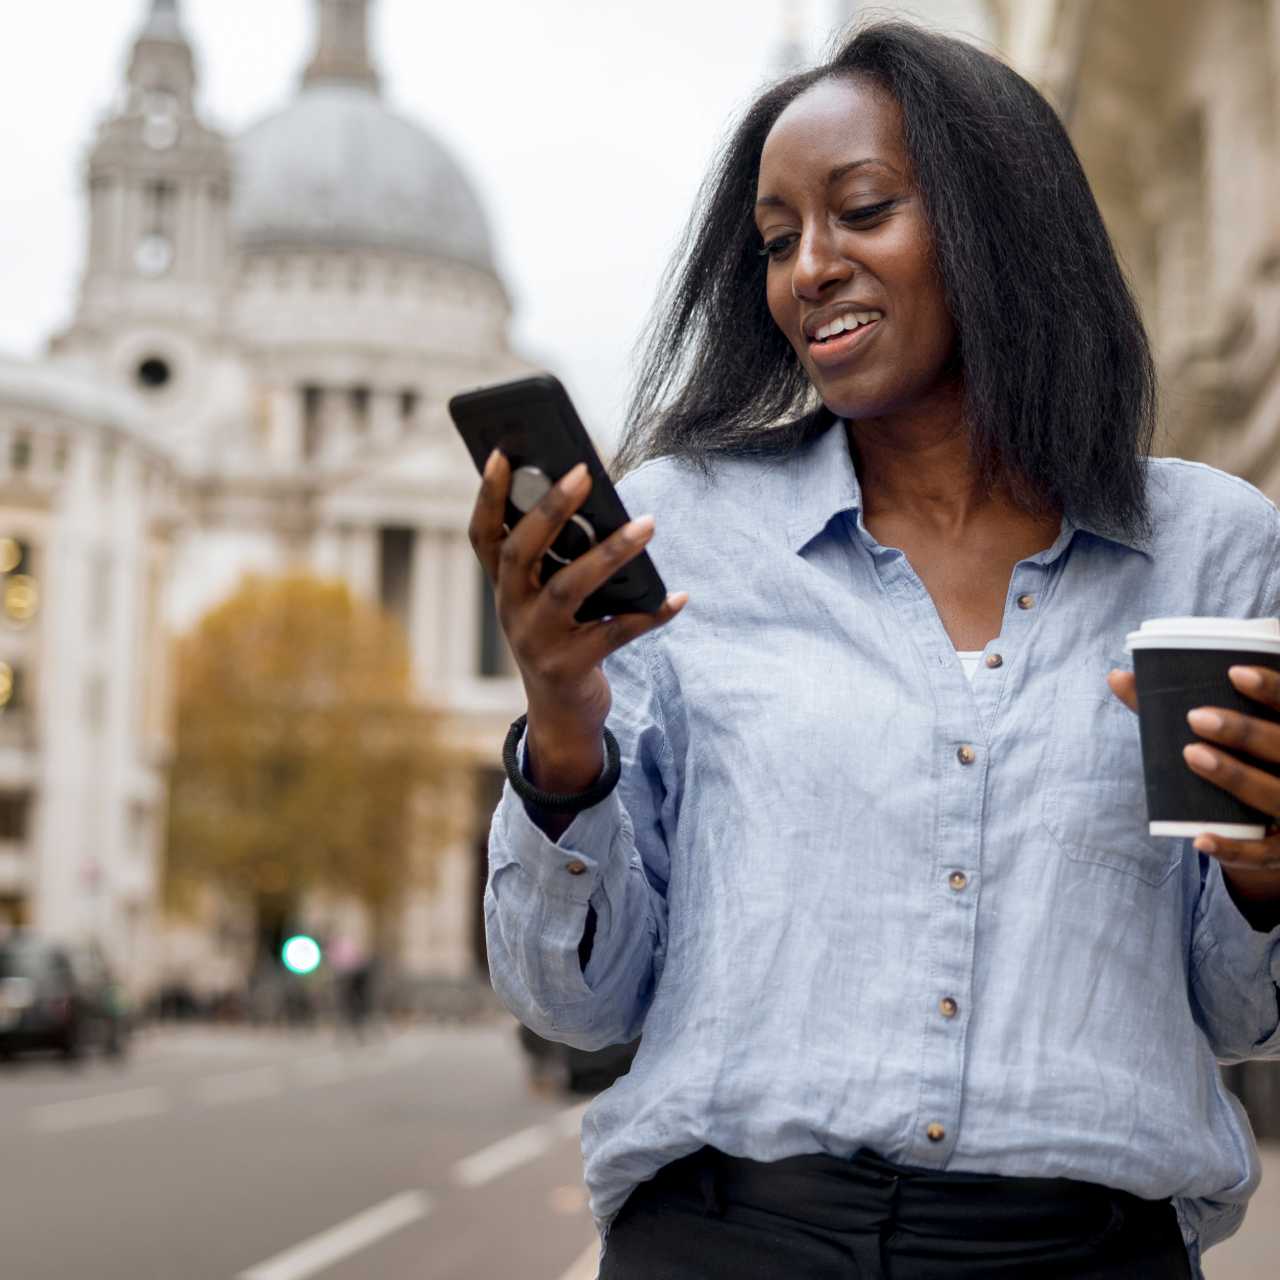 Woman wearing a buttoned blouse walking down a city street with a government building in the background with coffee in one hand and smart phone in the other. 